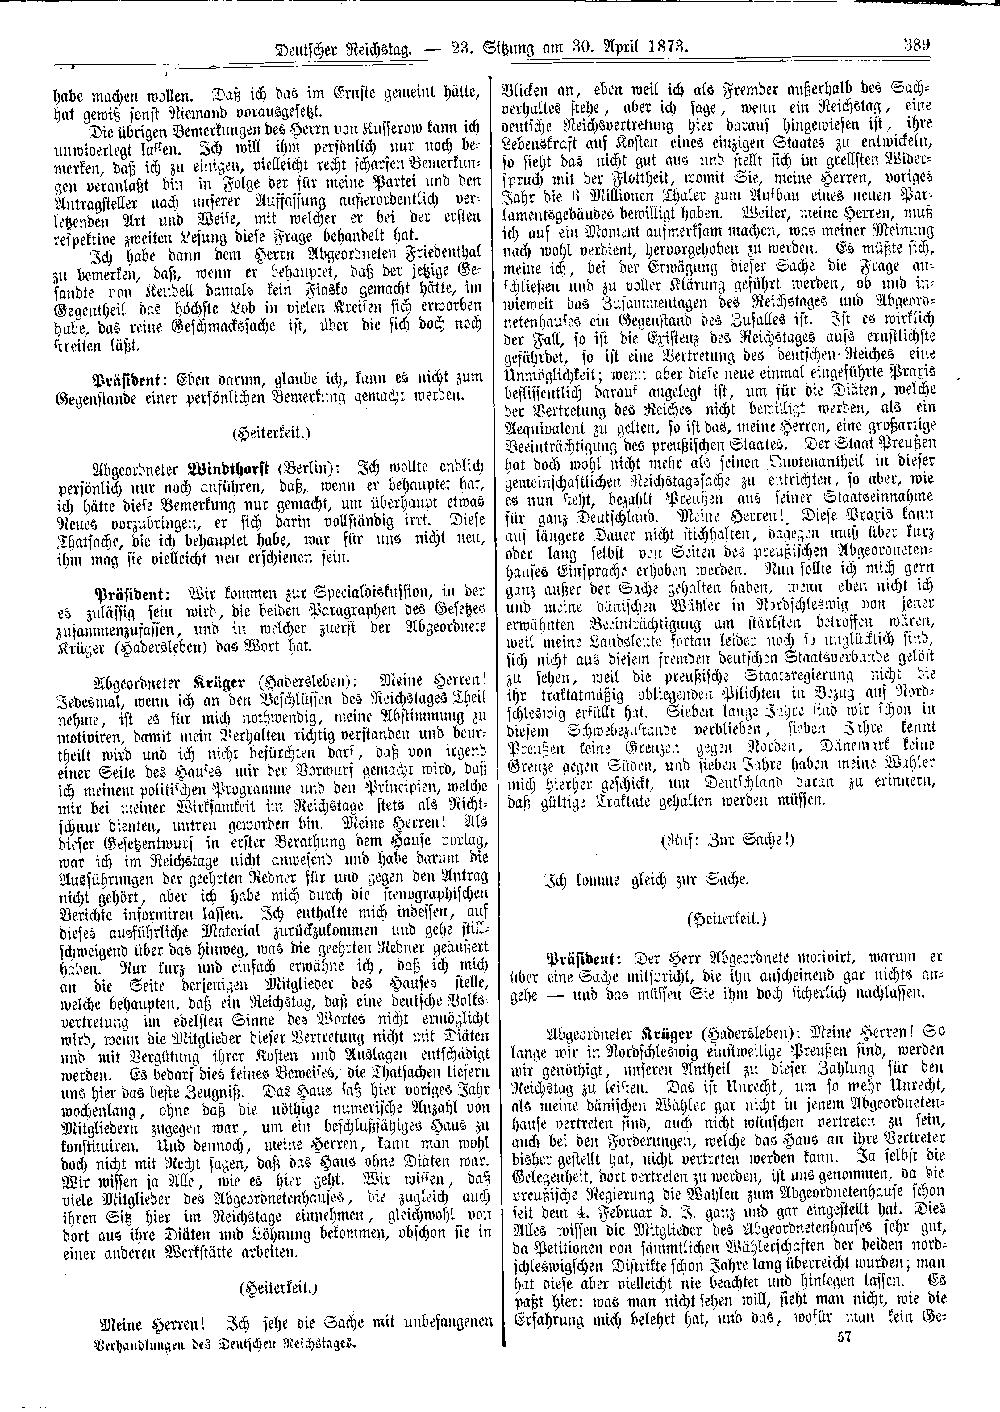 Scan of page 389